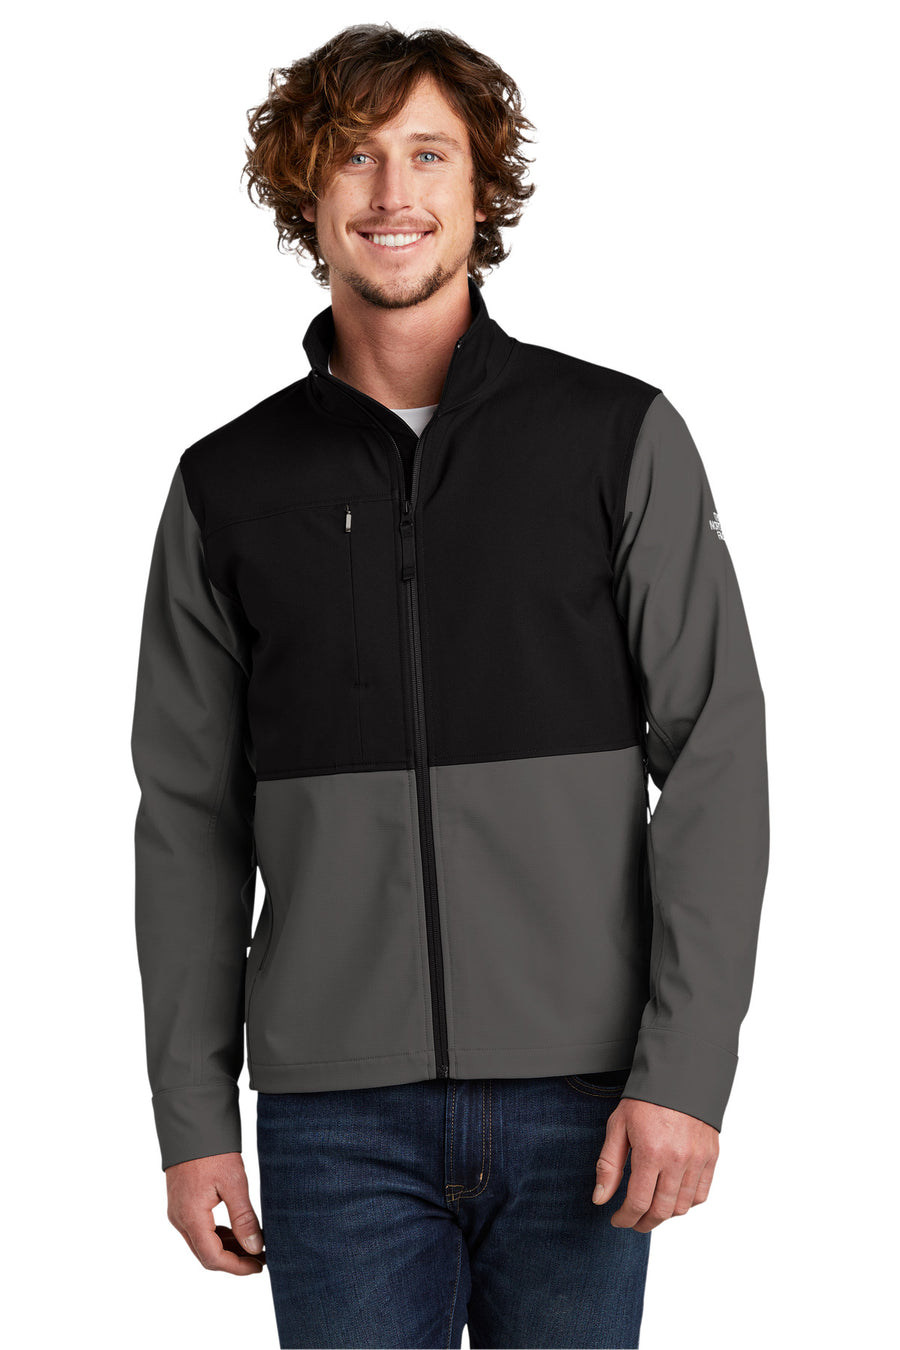 The North Face Castle Rock Soft Shell Jacket.